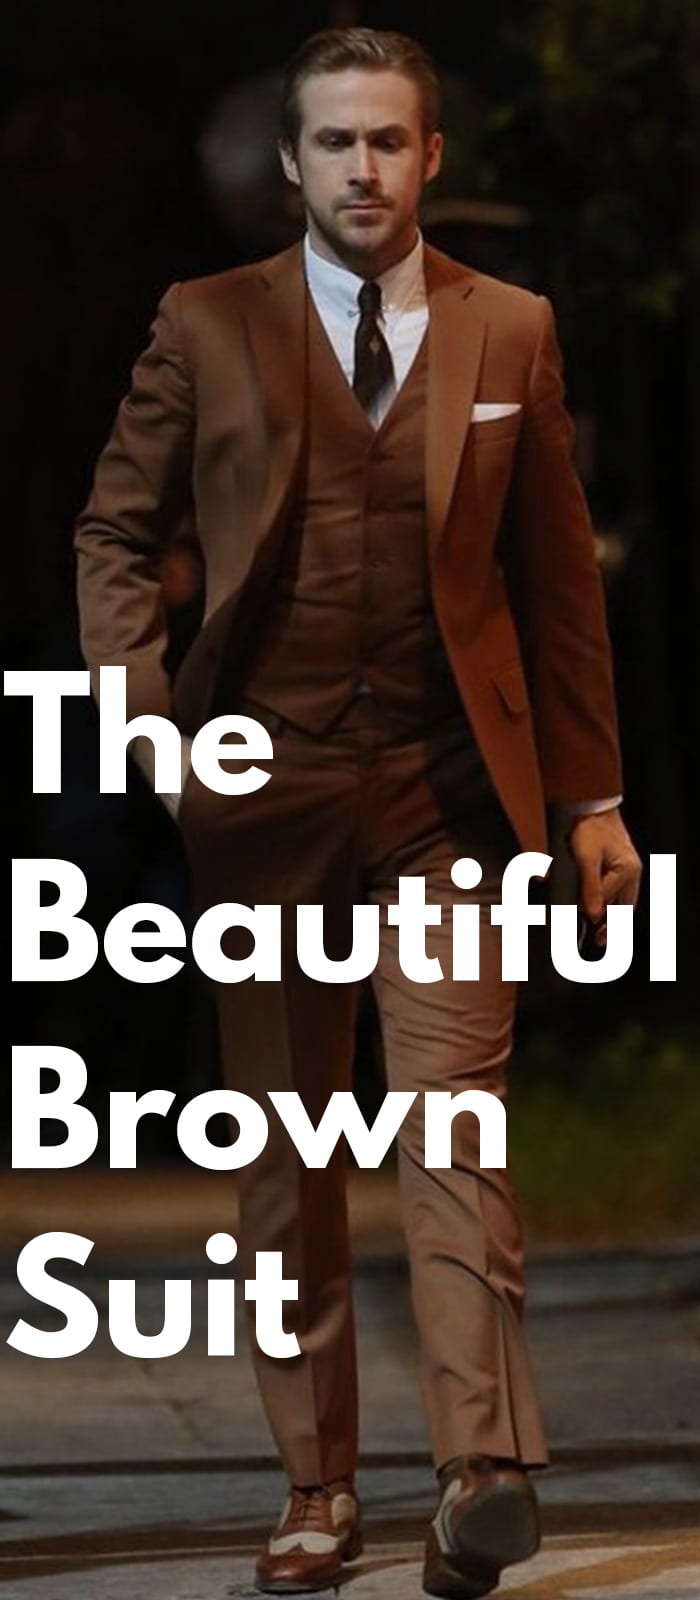 The Beautiful Brown Suit